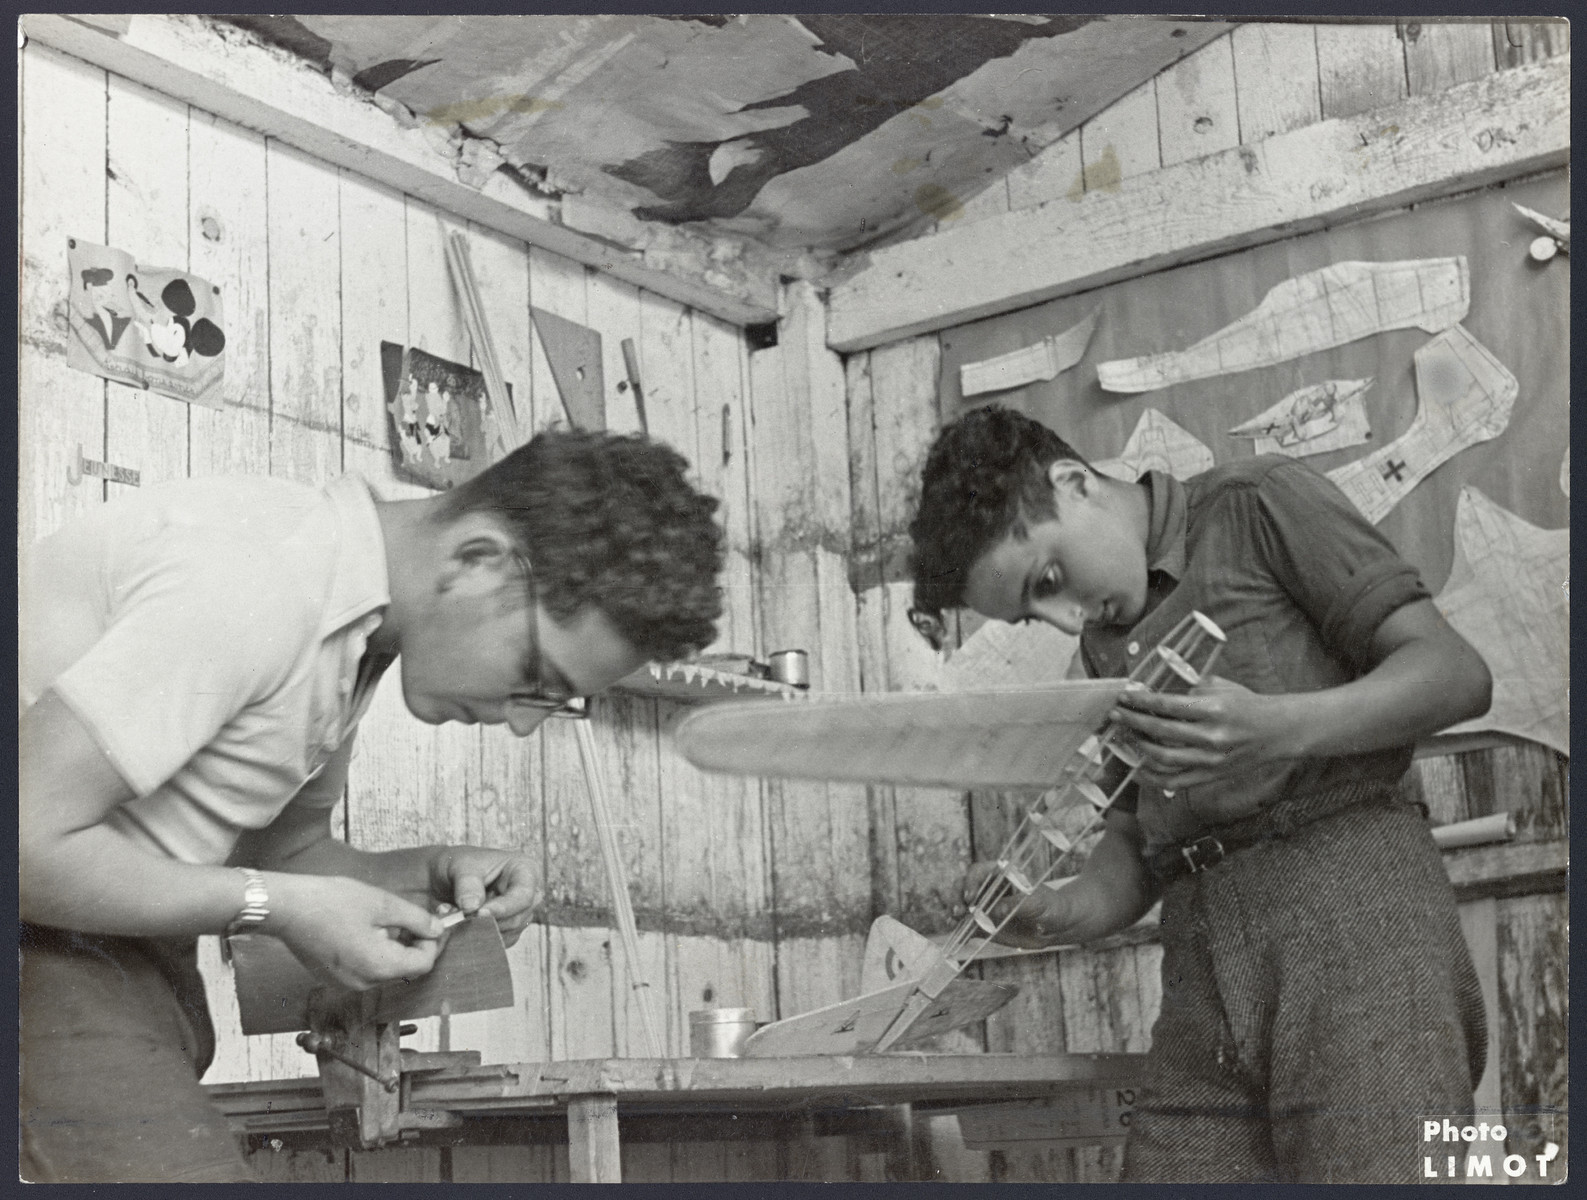 Two teeange boys build wooden airplane models in a postwar OSE children's home in France.